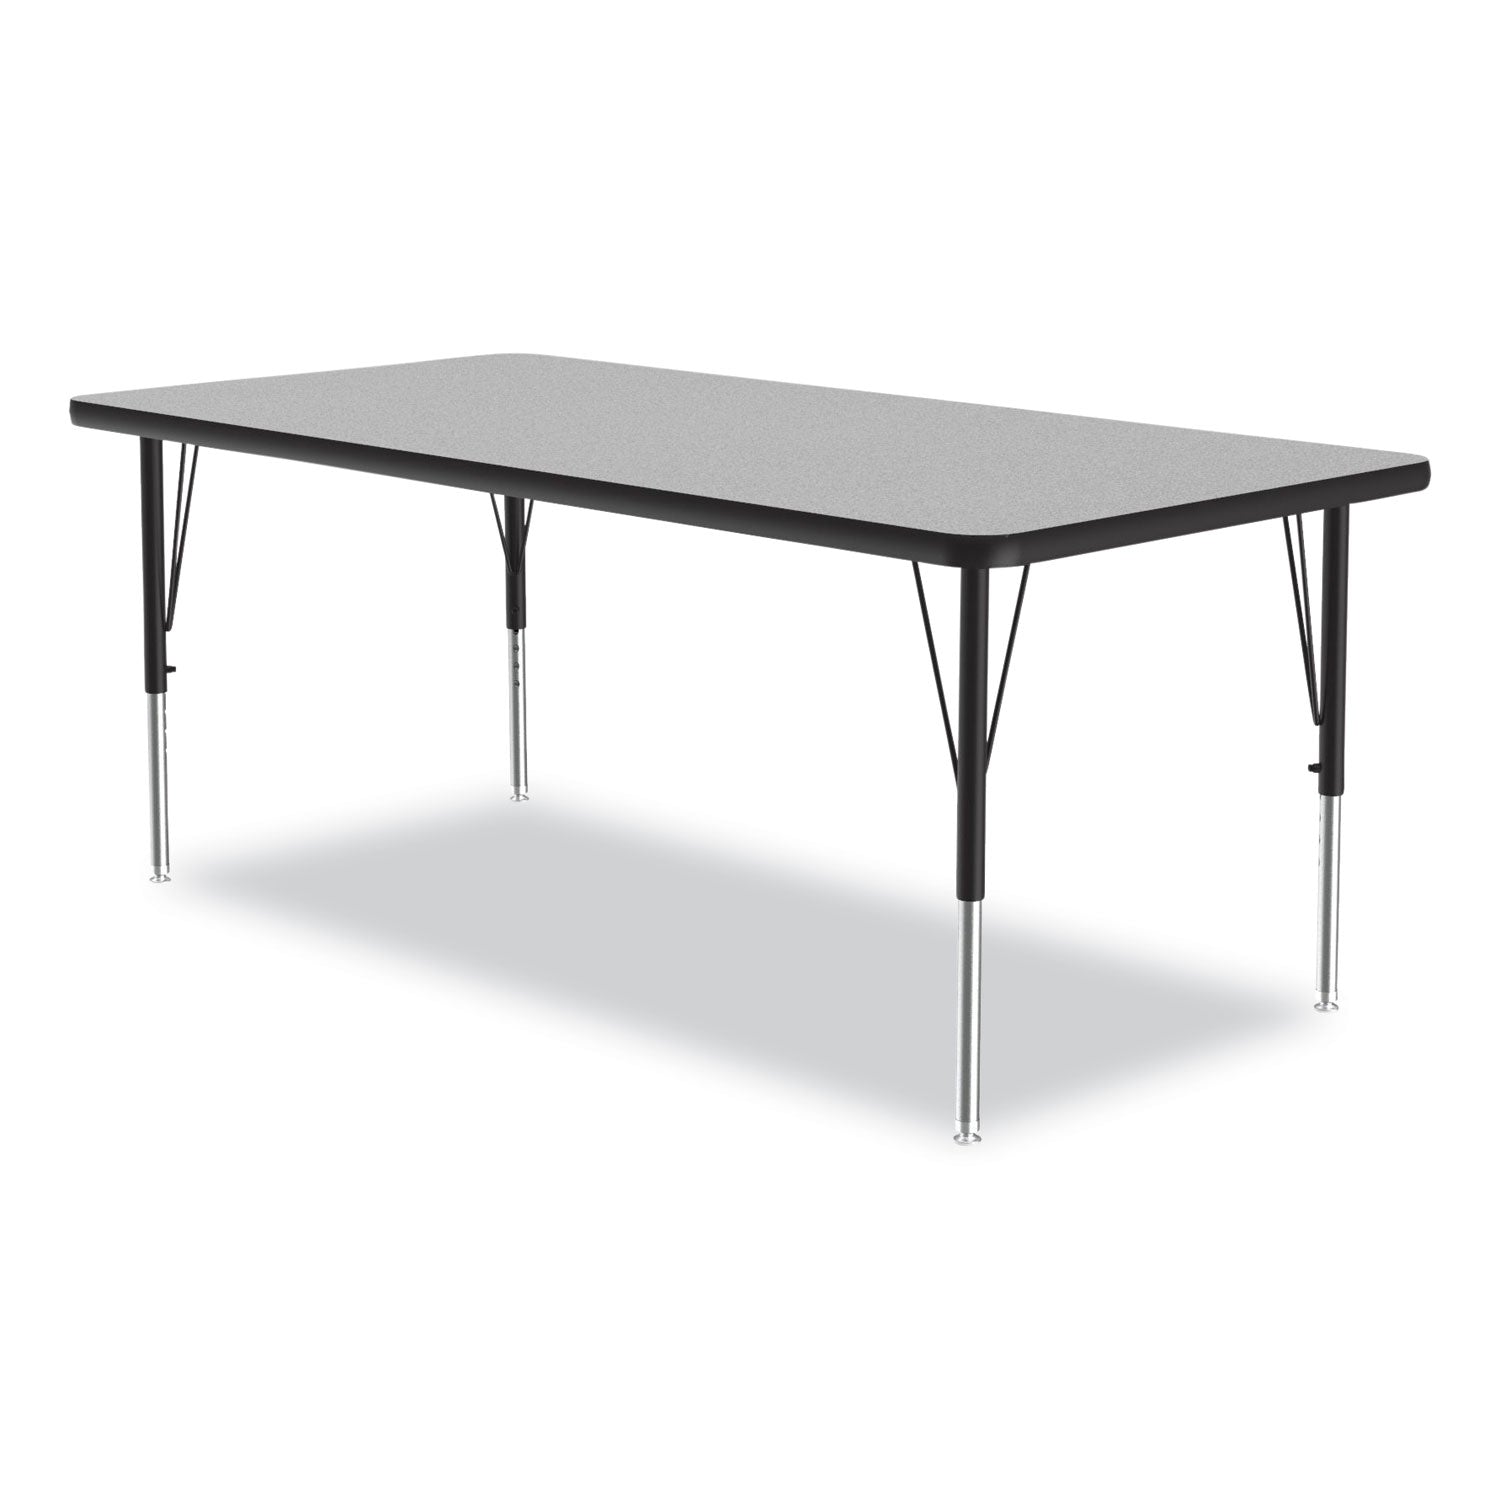 height-adjustable-activity-tables-rectangular-60w-x-30d-x-19h-gray-granite-4-pallet-ships-in-4-6-business-days_crl3060tf1595k4 - 1